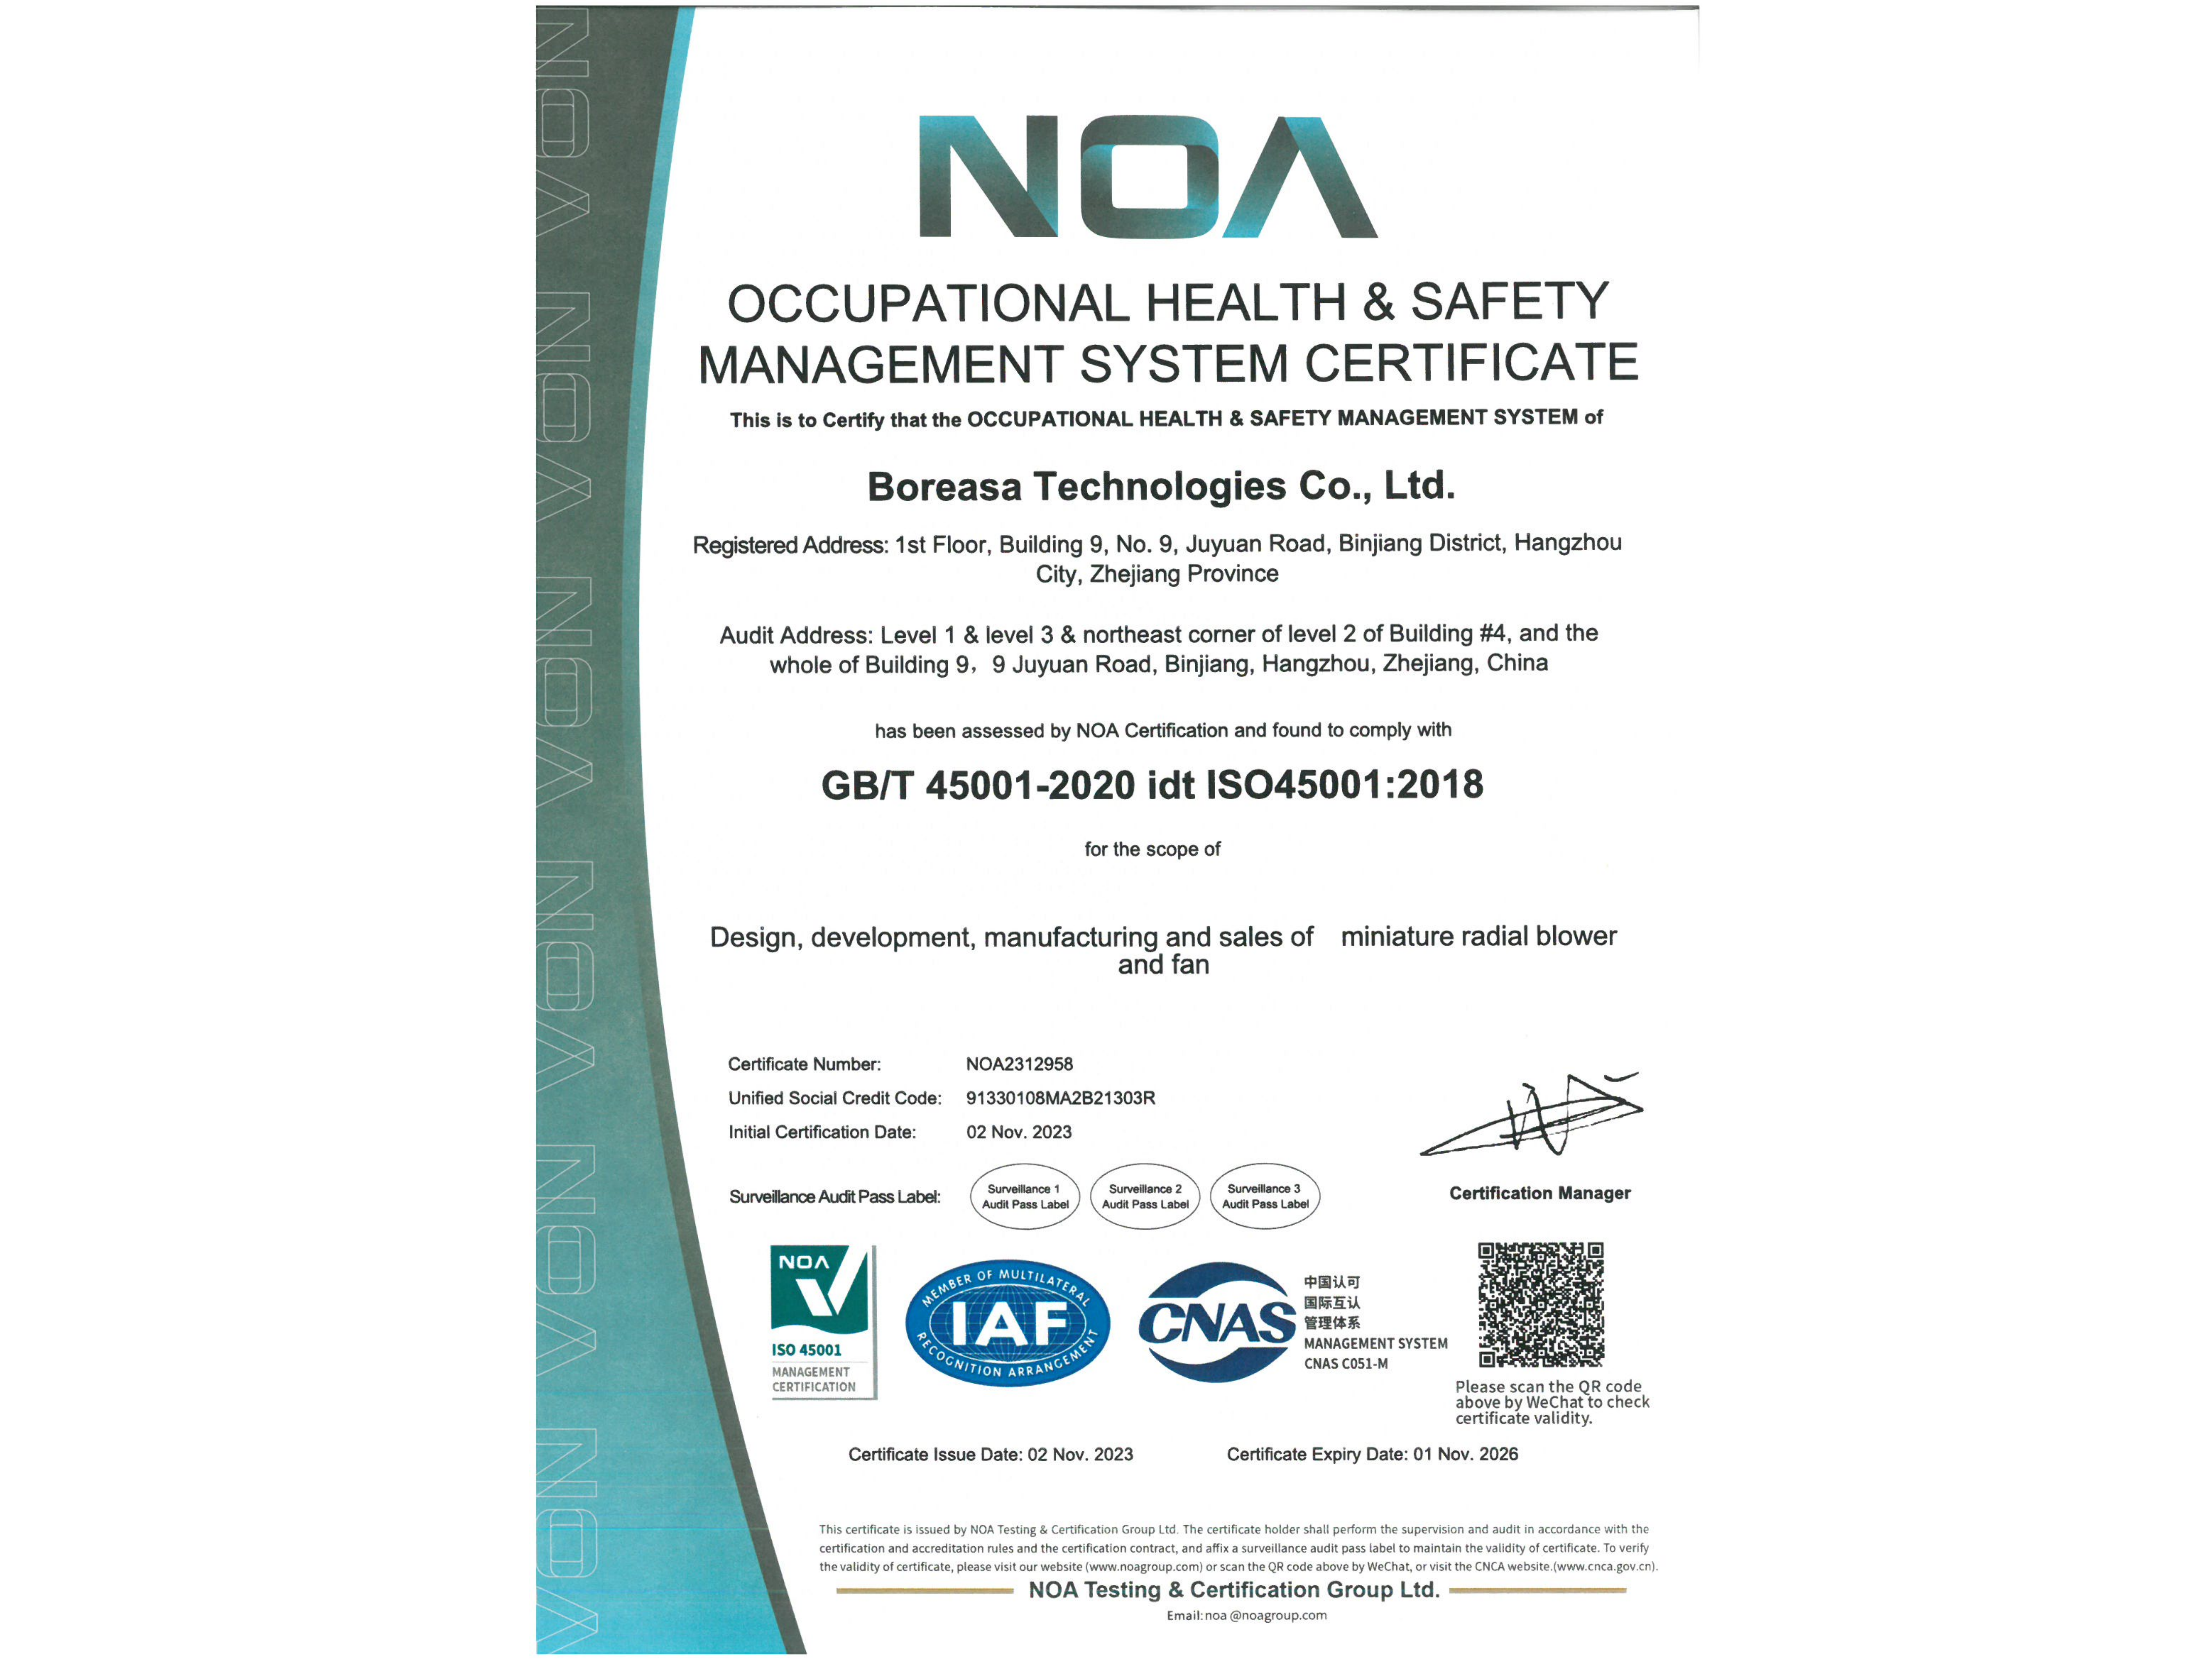 Boreasa was awarded ISO45001:2018 certification